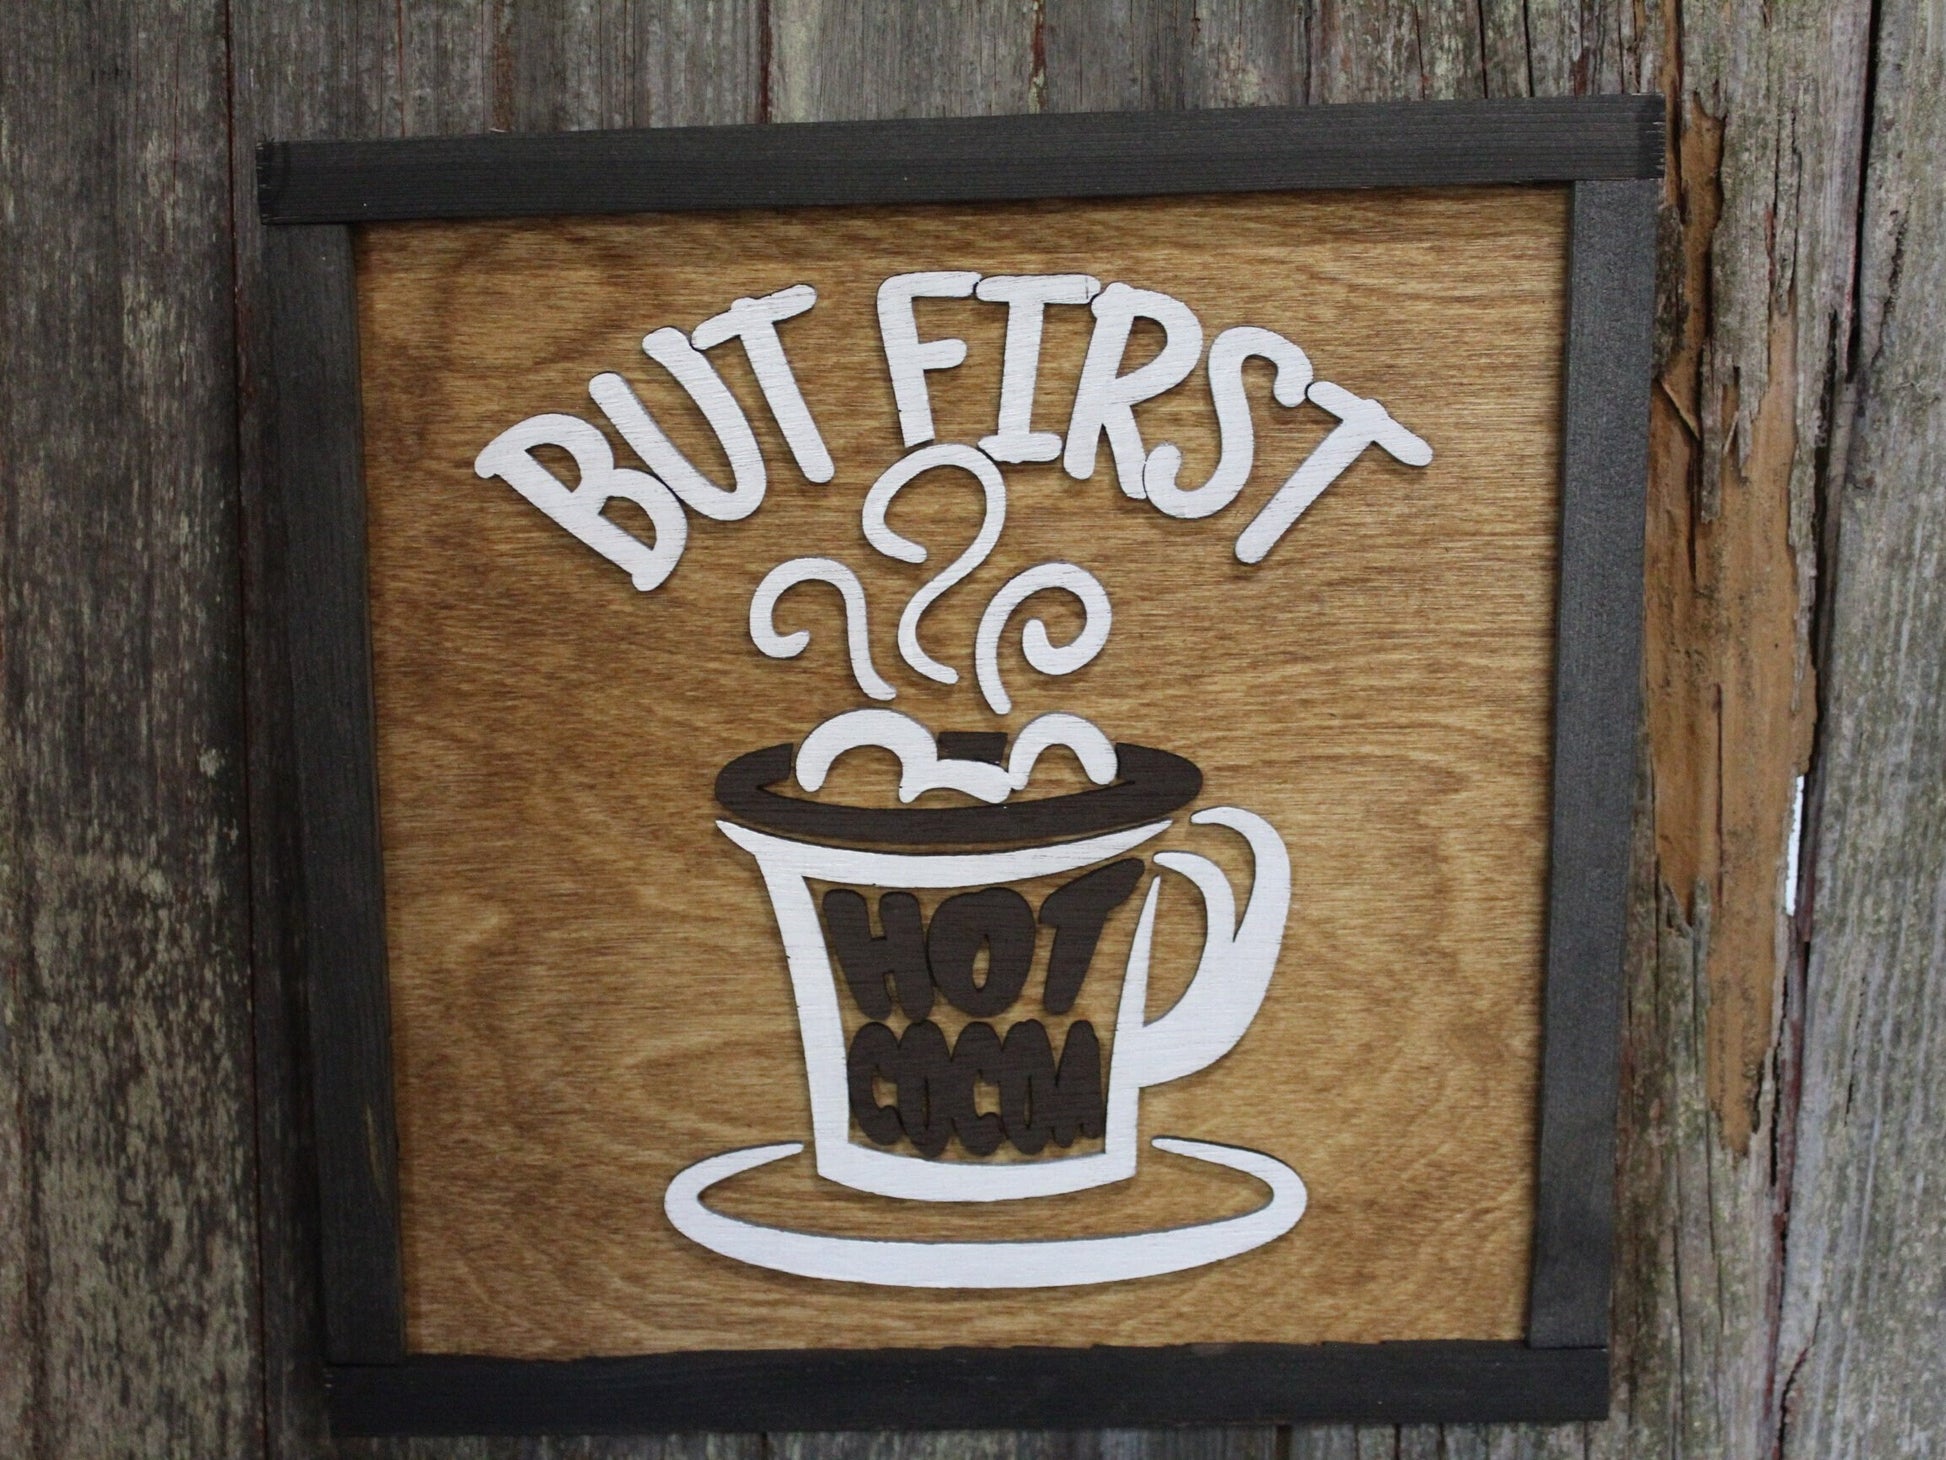 But First Hot Cocoa Winter Wall Decoration Country Primitive Coffee Cup Frame Kitchen Sign Mug Rustic Décor Gift Warm Chocolate Milk Xmas